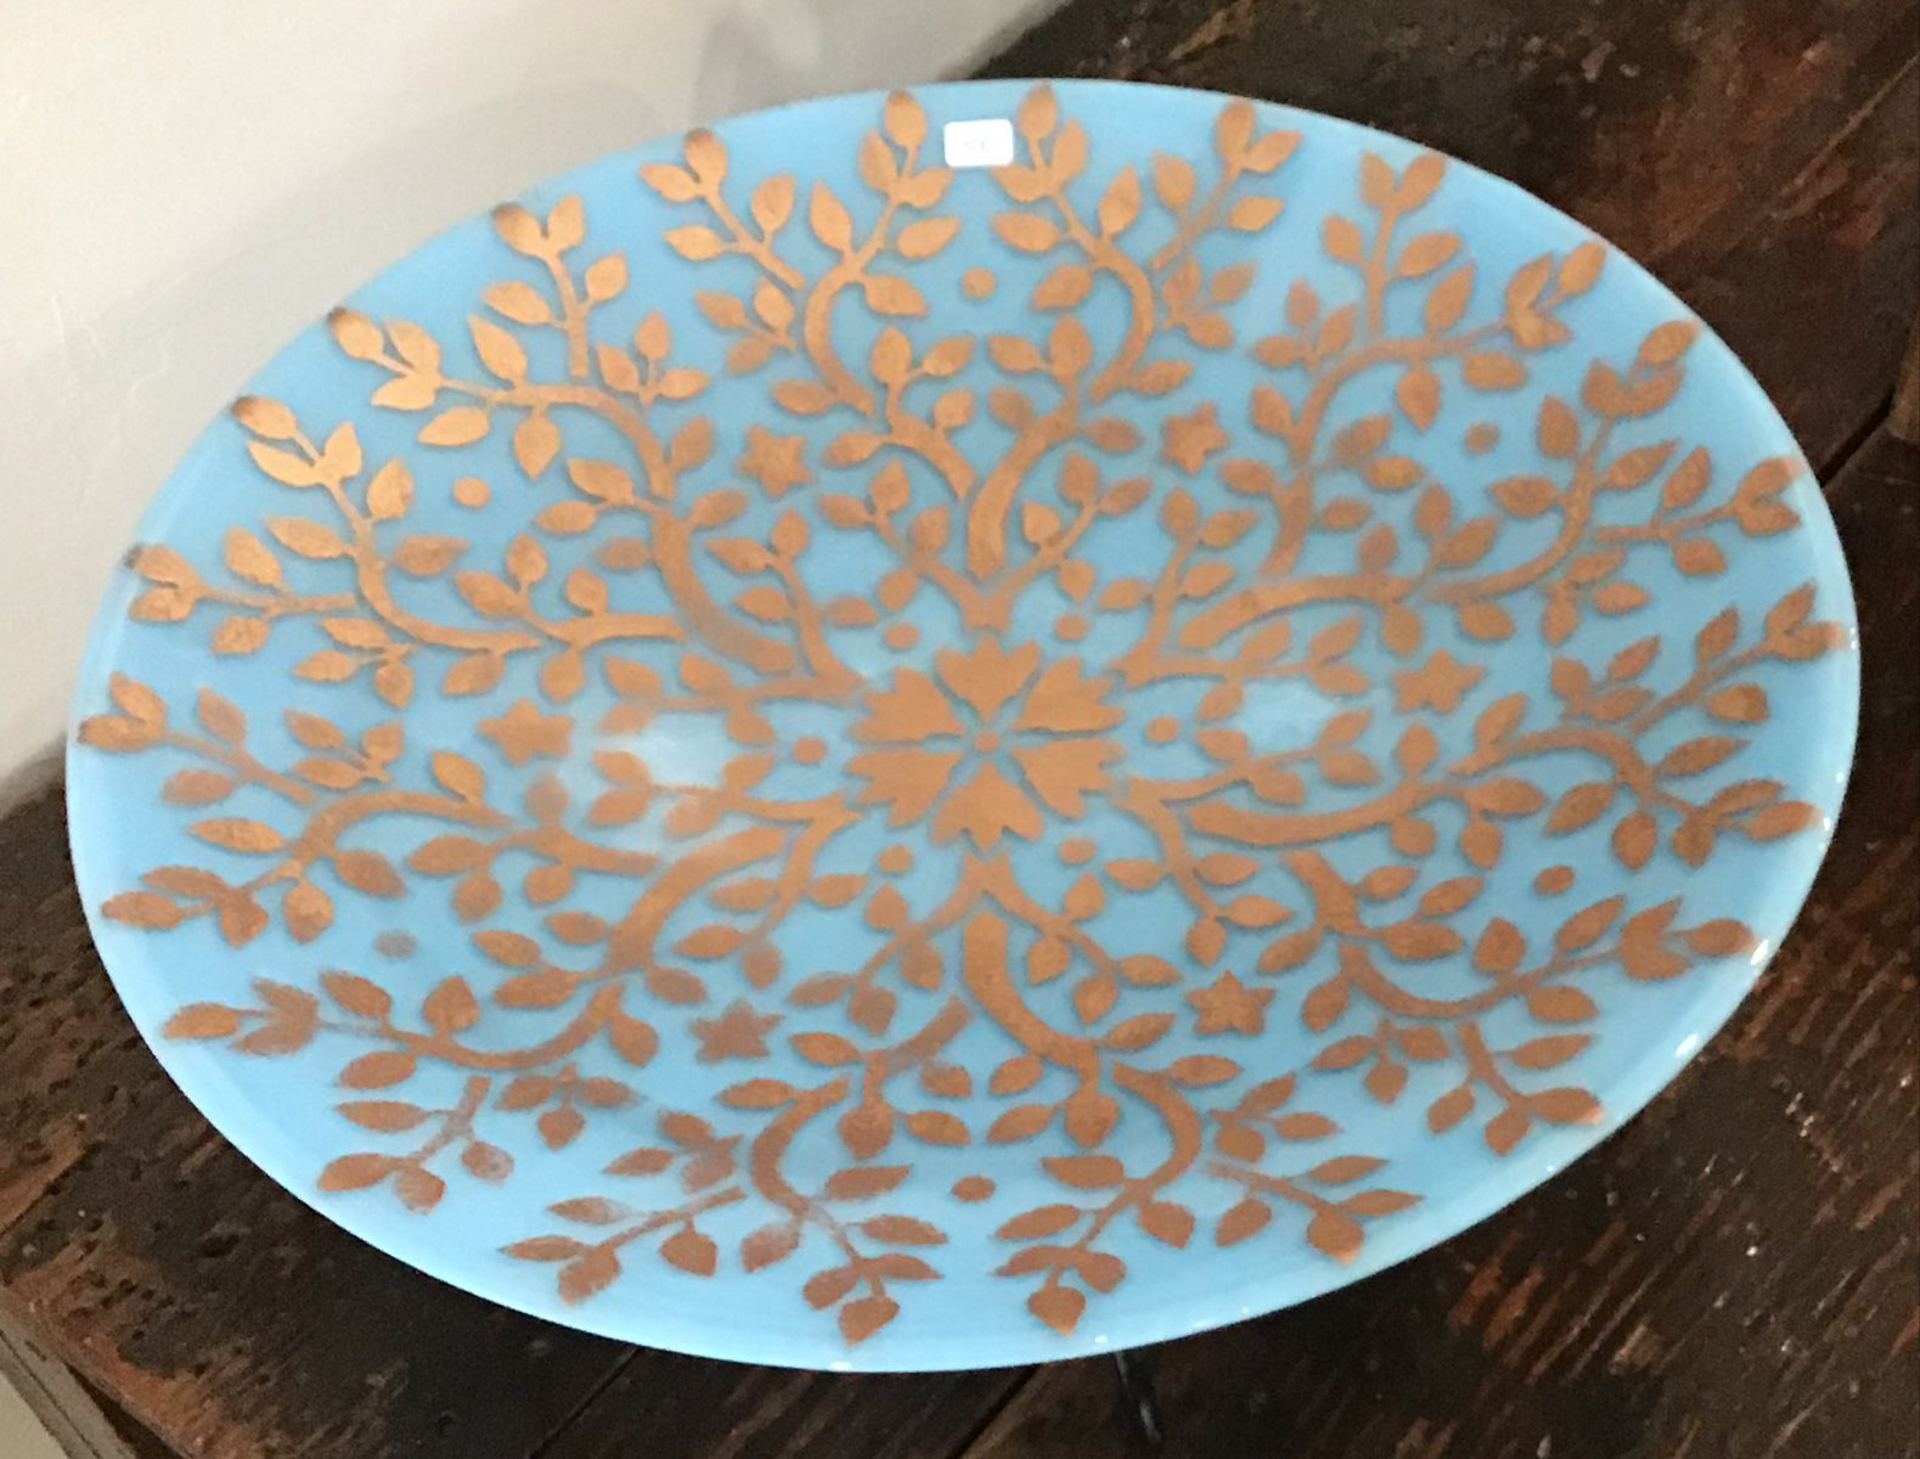 17" Tree of Life Glass Bowl by Marian Pyron